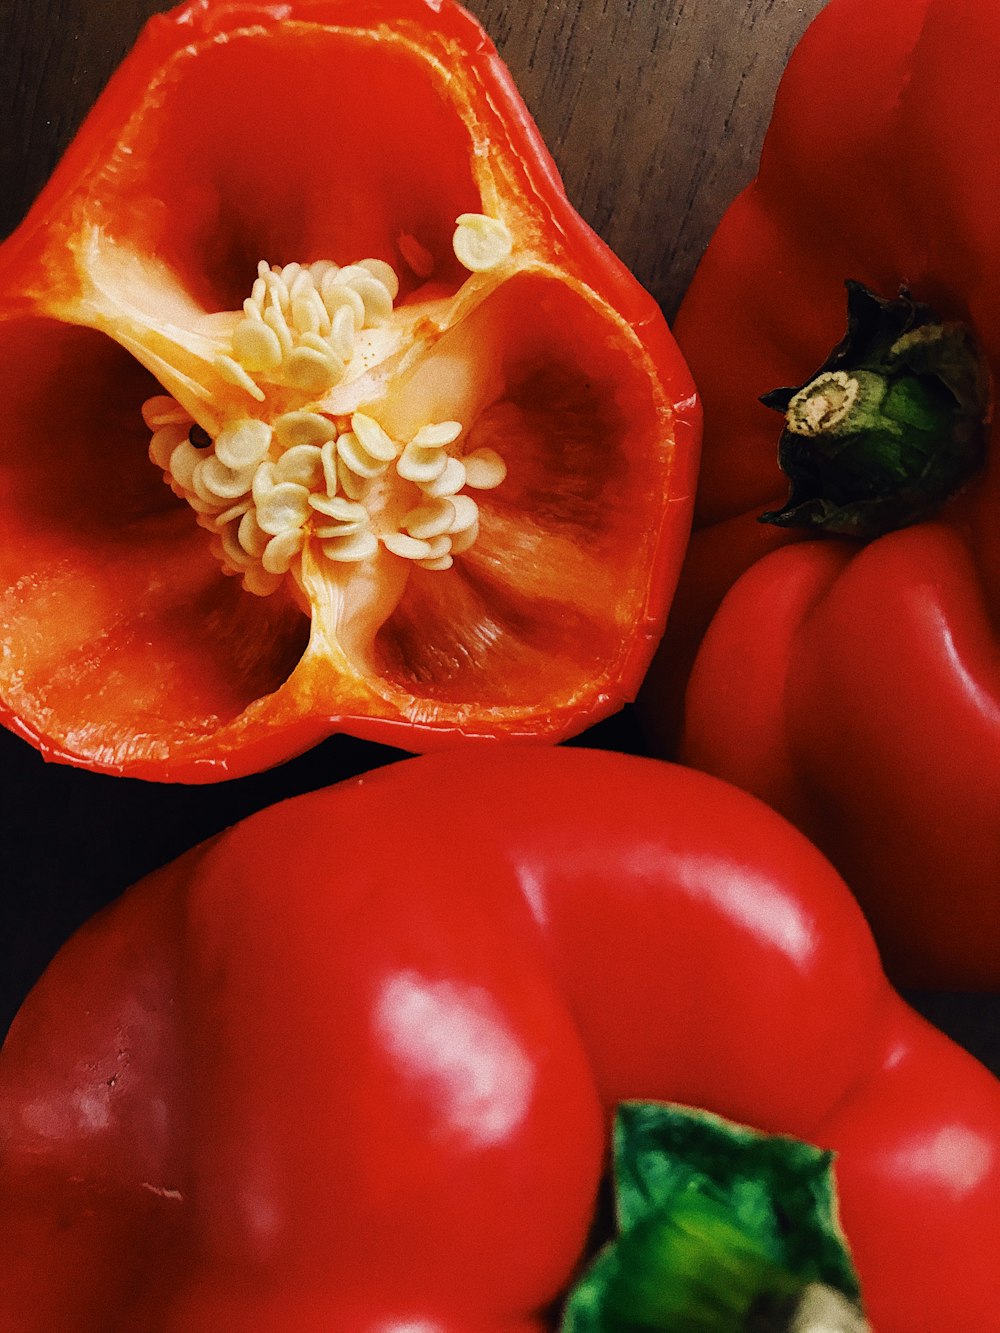 red bell pepper in close up photography